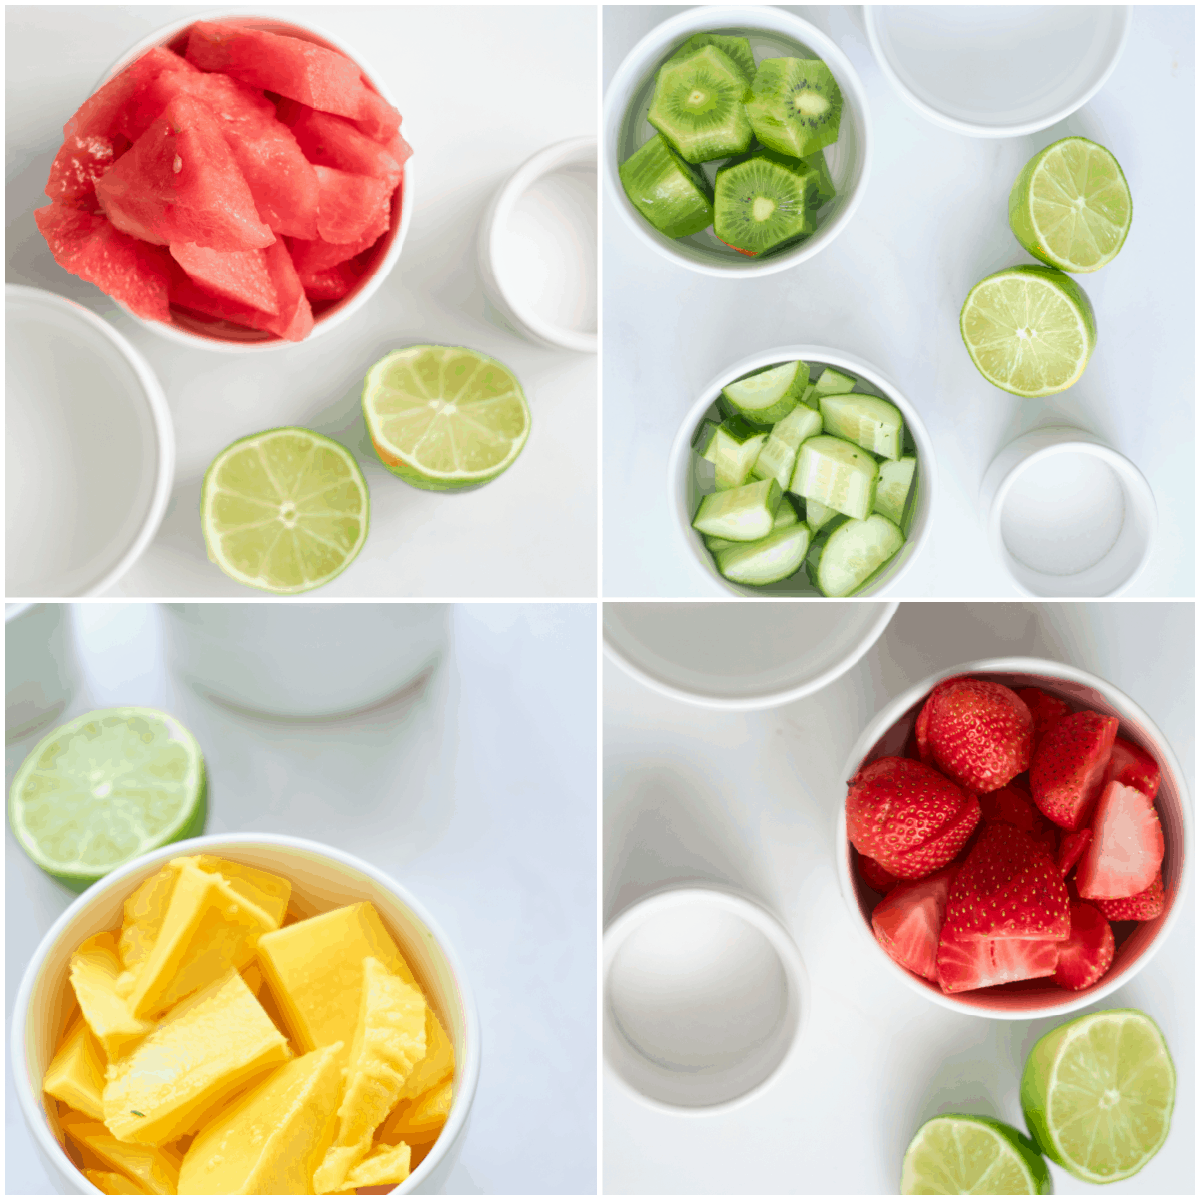 the ingredients needed for making the four different flavor varieties of mexican paletas ice pops